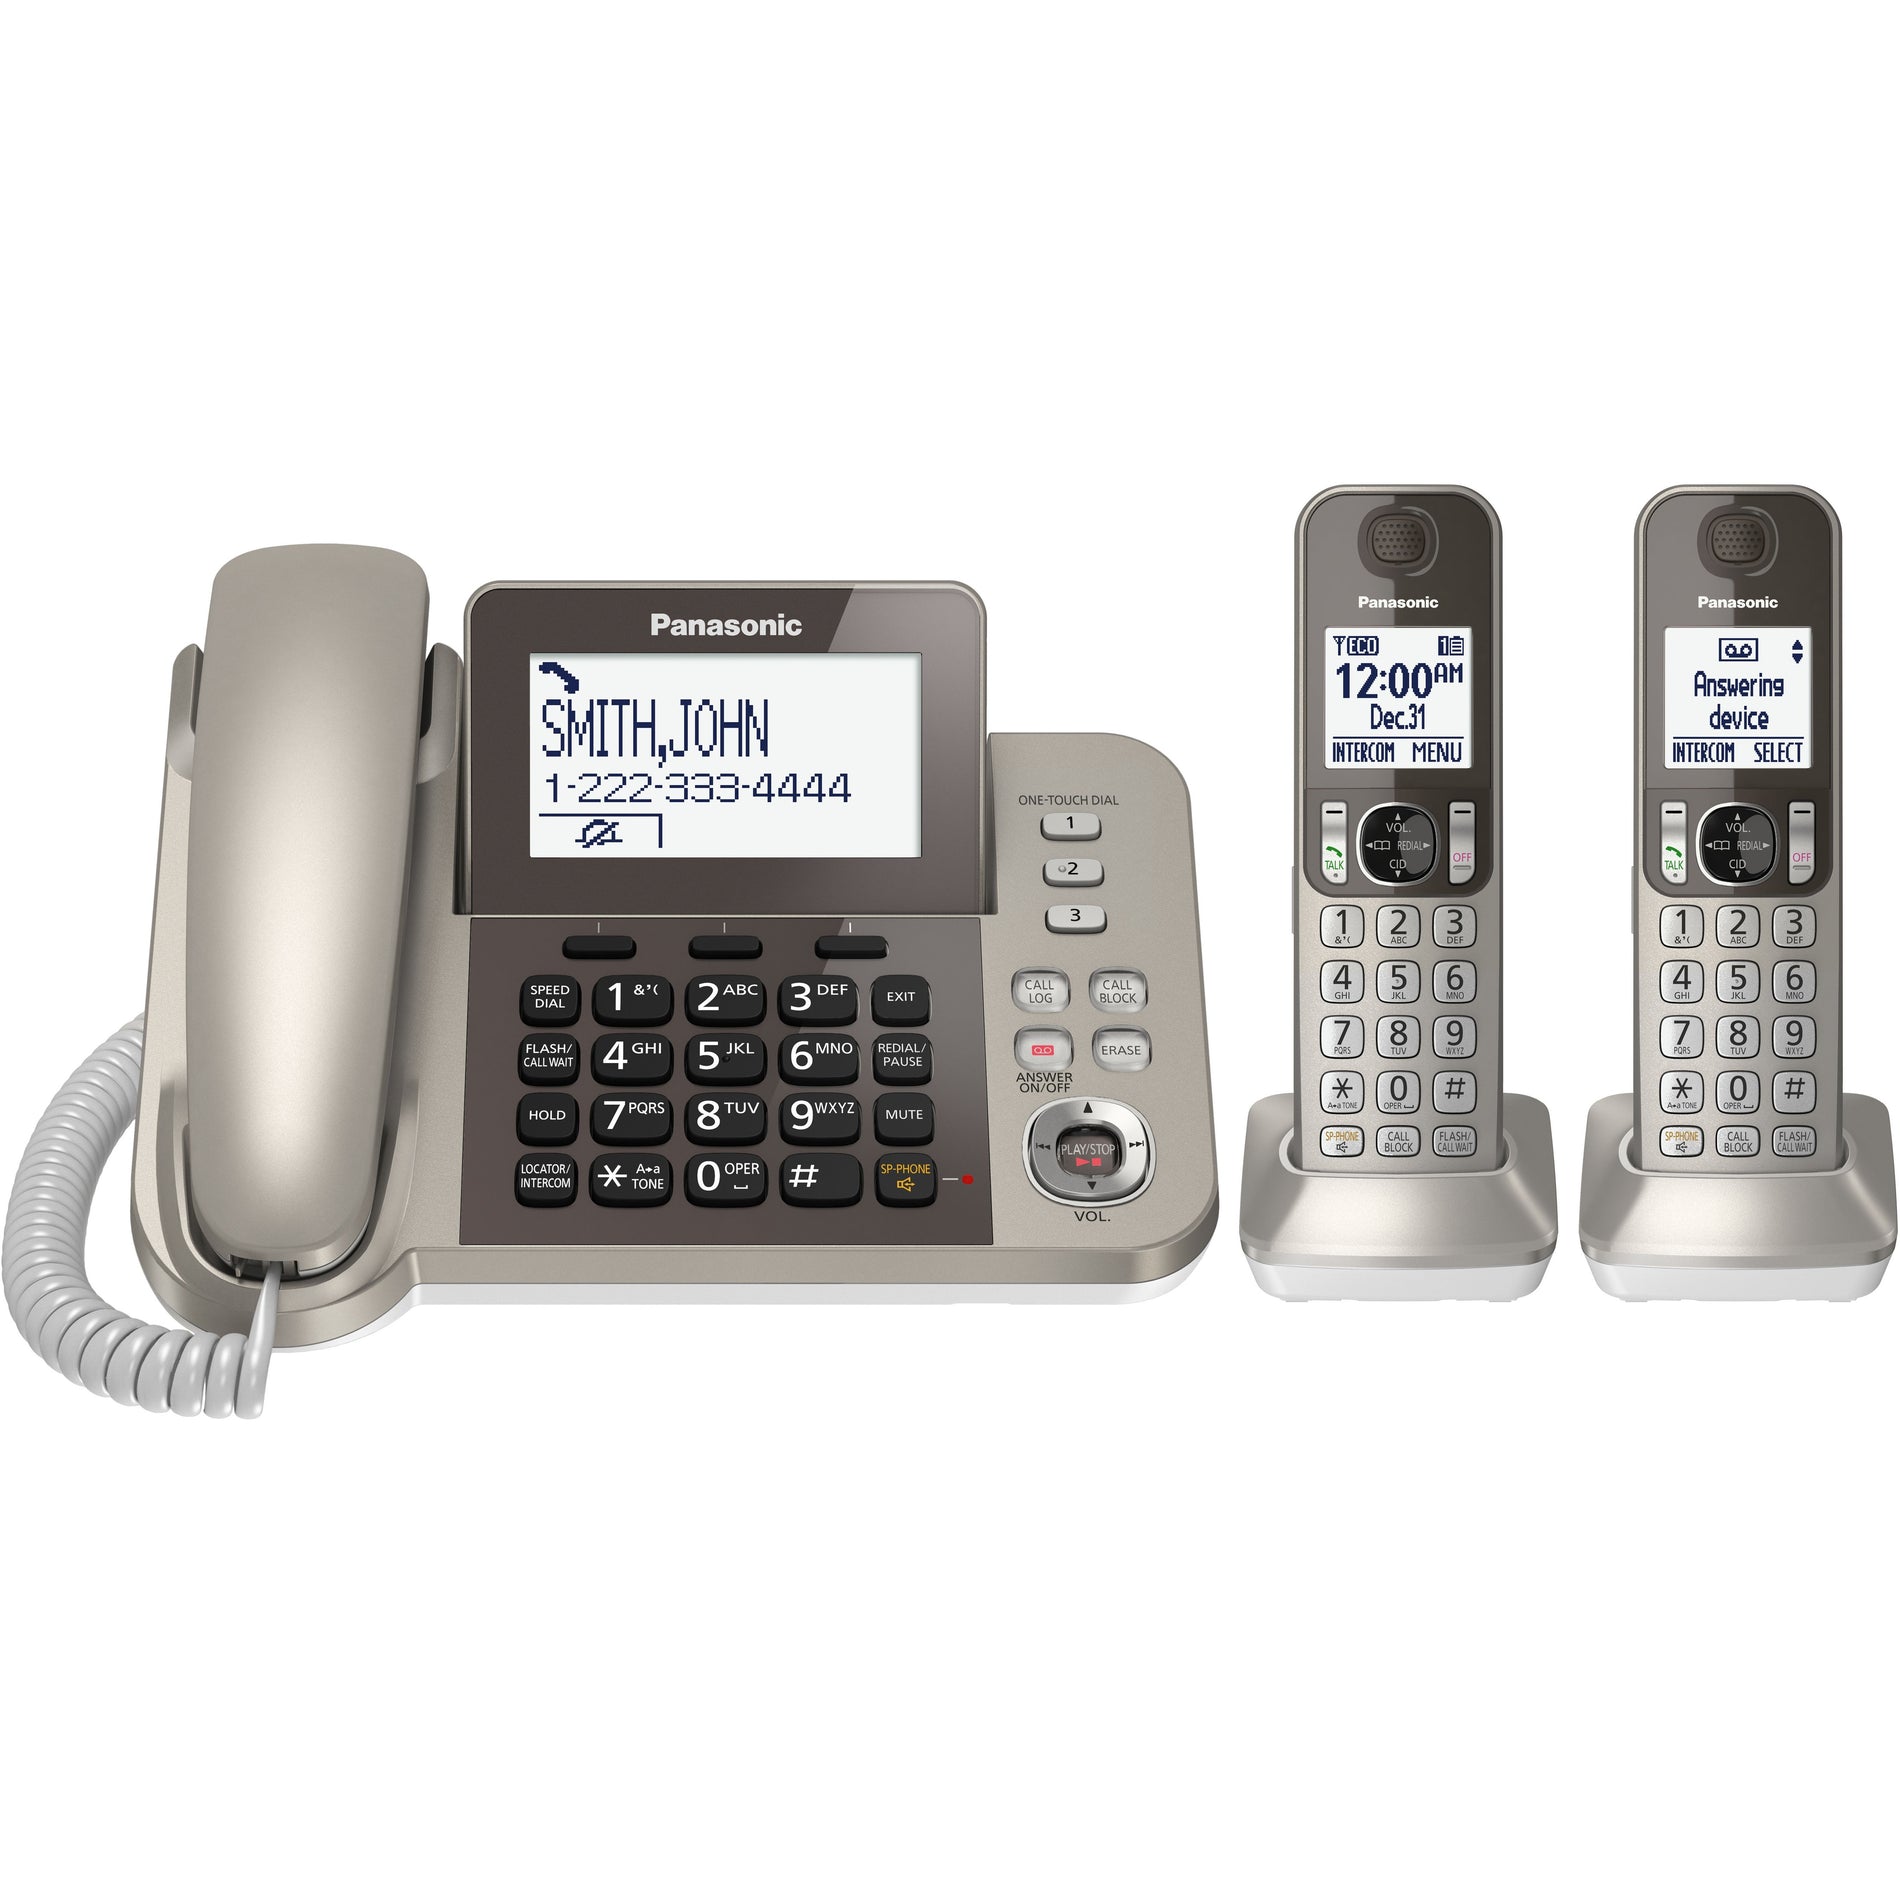 Panasonic DECT 6.0 Cordless Phone KX-TGF352N Champagne Gold, Call Block, Night Mode, Noise Reduction System, Eco Mode